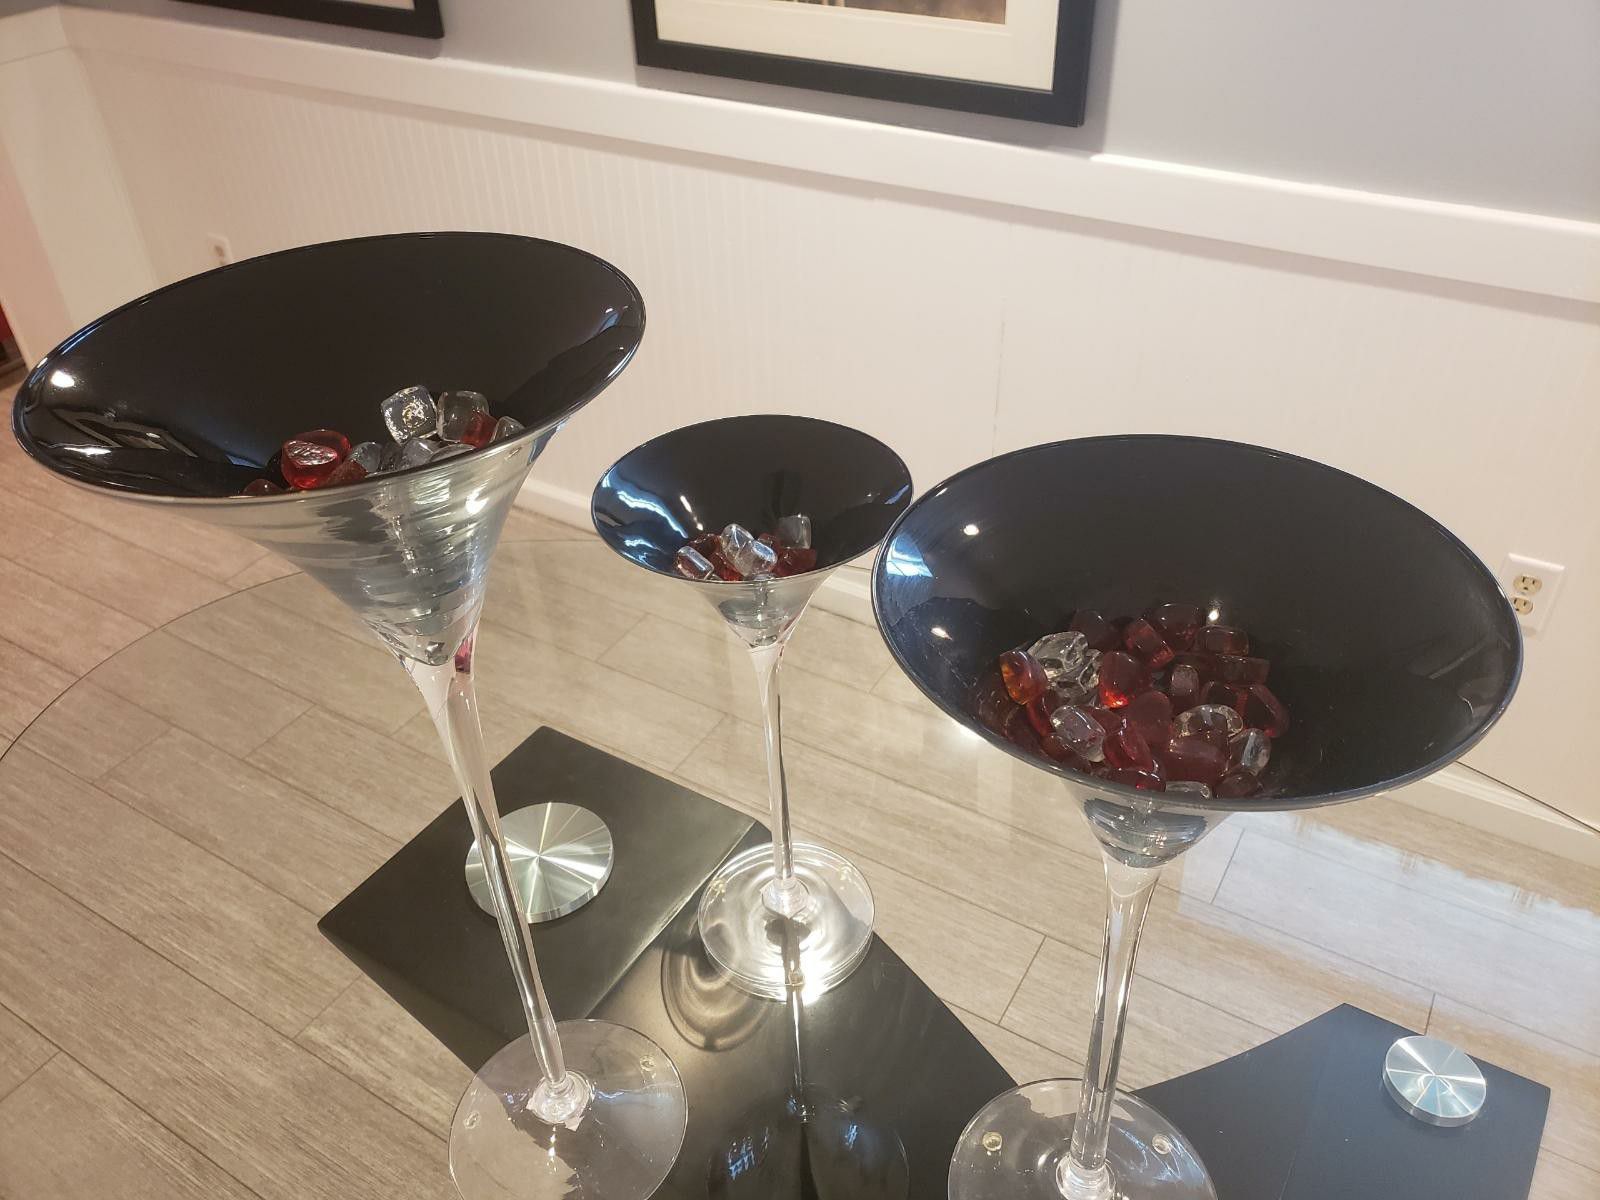 3 large decorative martini shaped glasses for table display